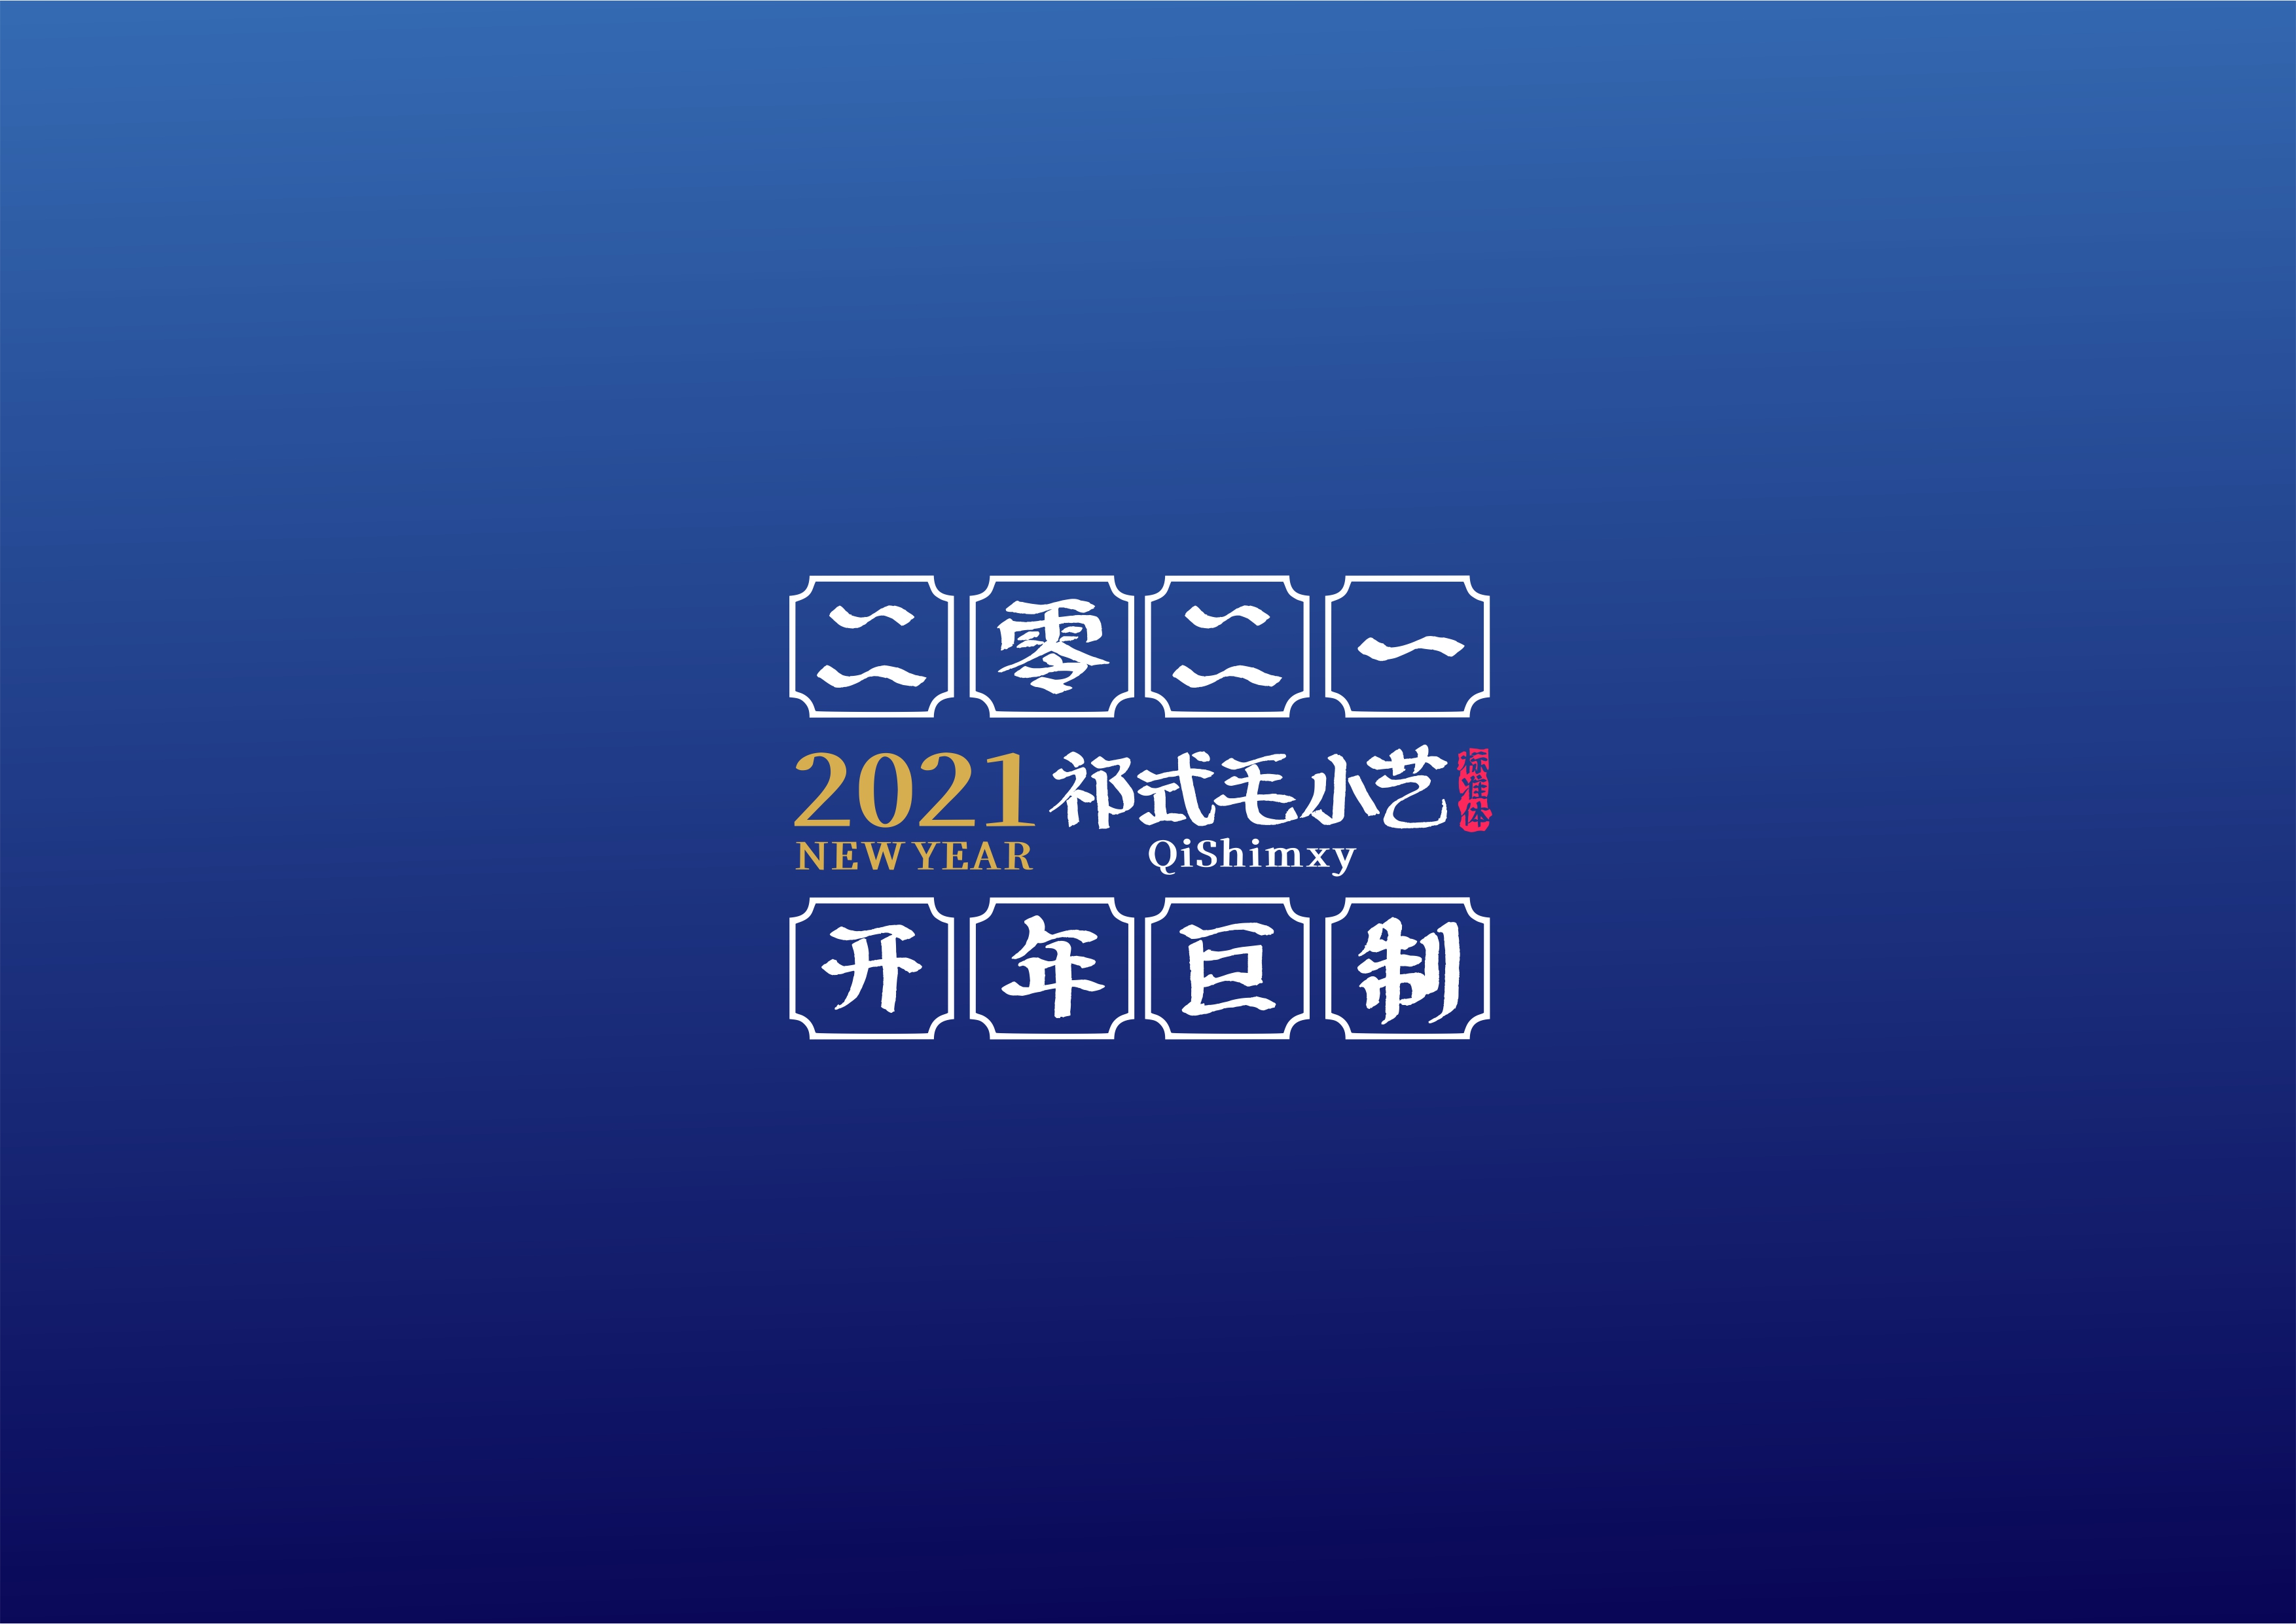 In 2021, three new words were released jointly